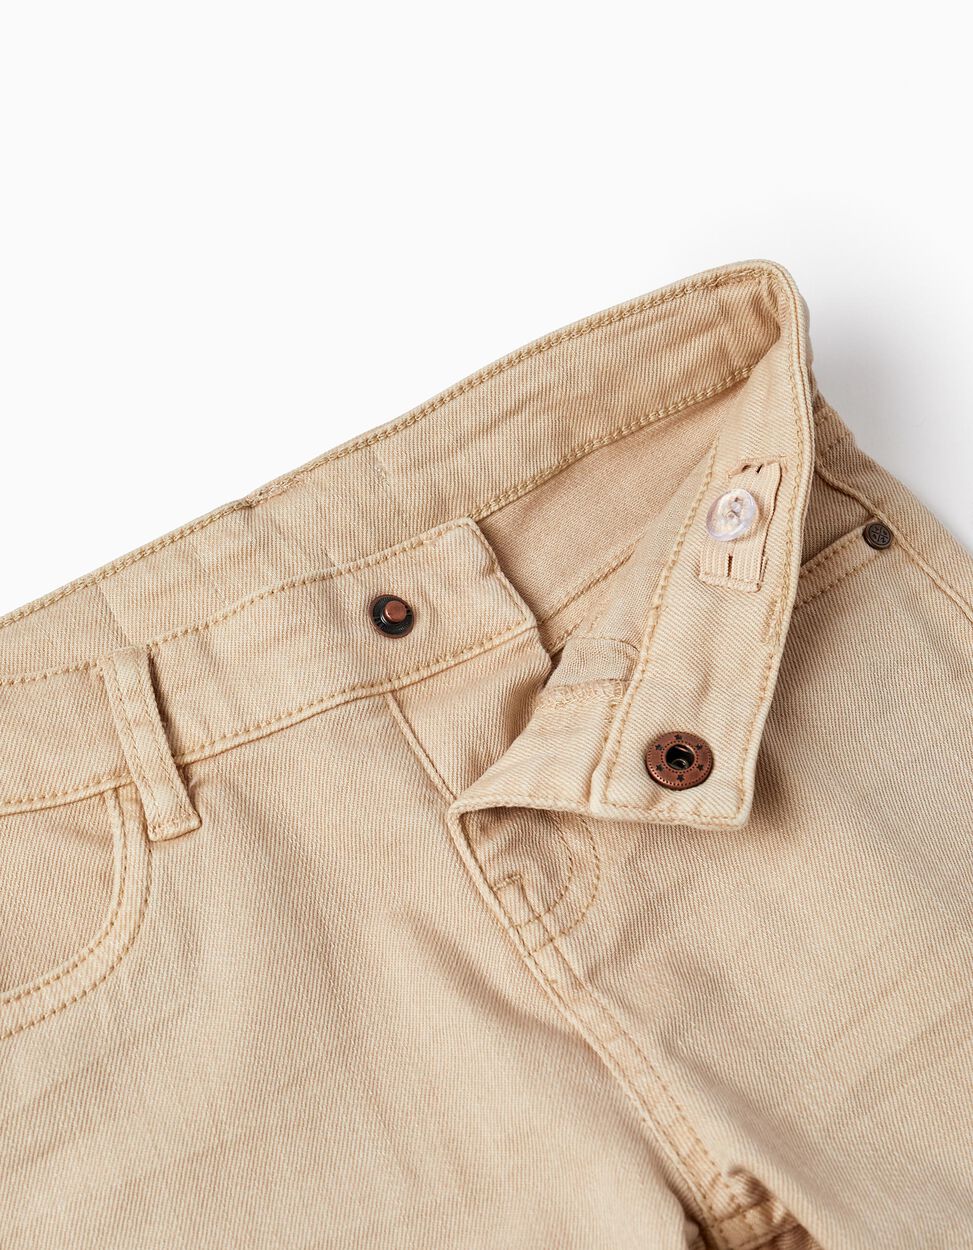 Buy Online Cotton Twill Shorts for Baby Boy, Beige